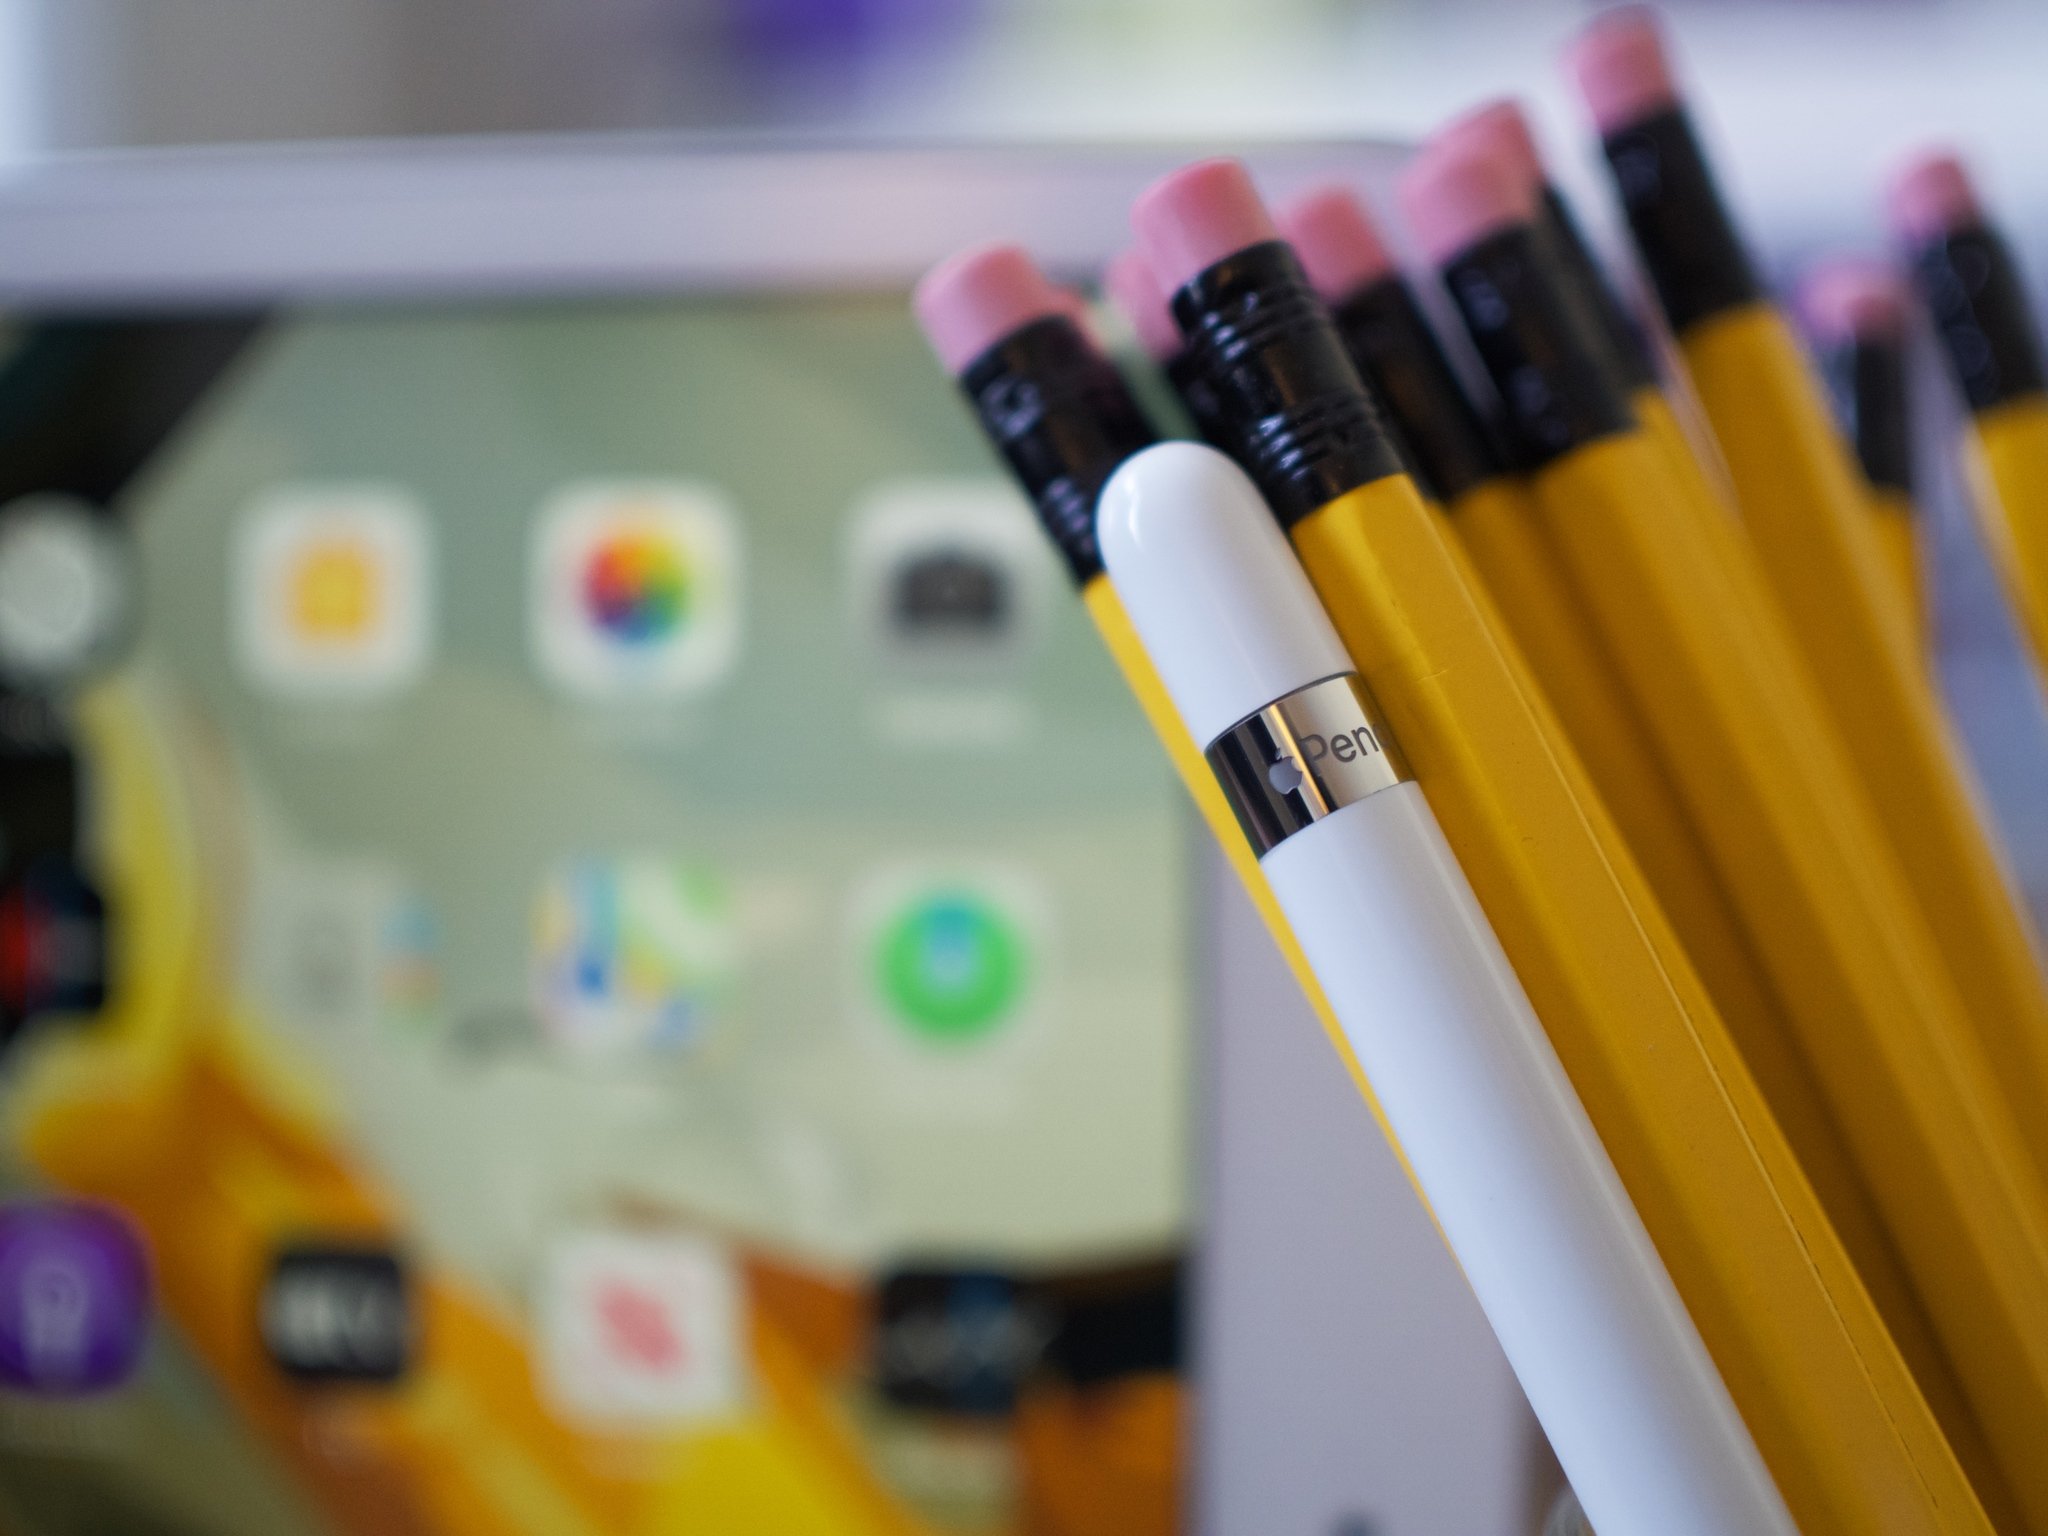 Apple Pencil First-Generation with pencils